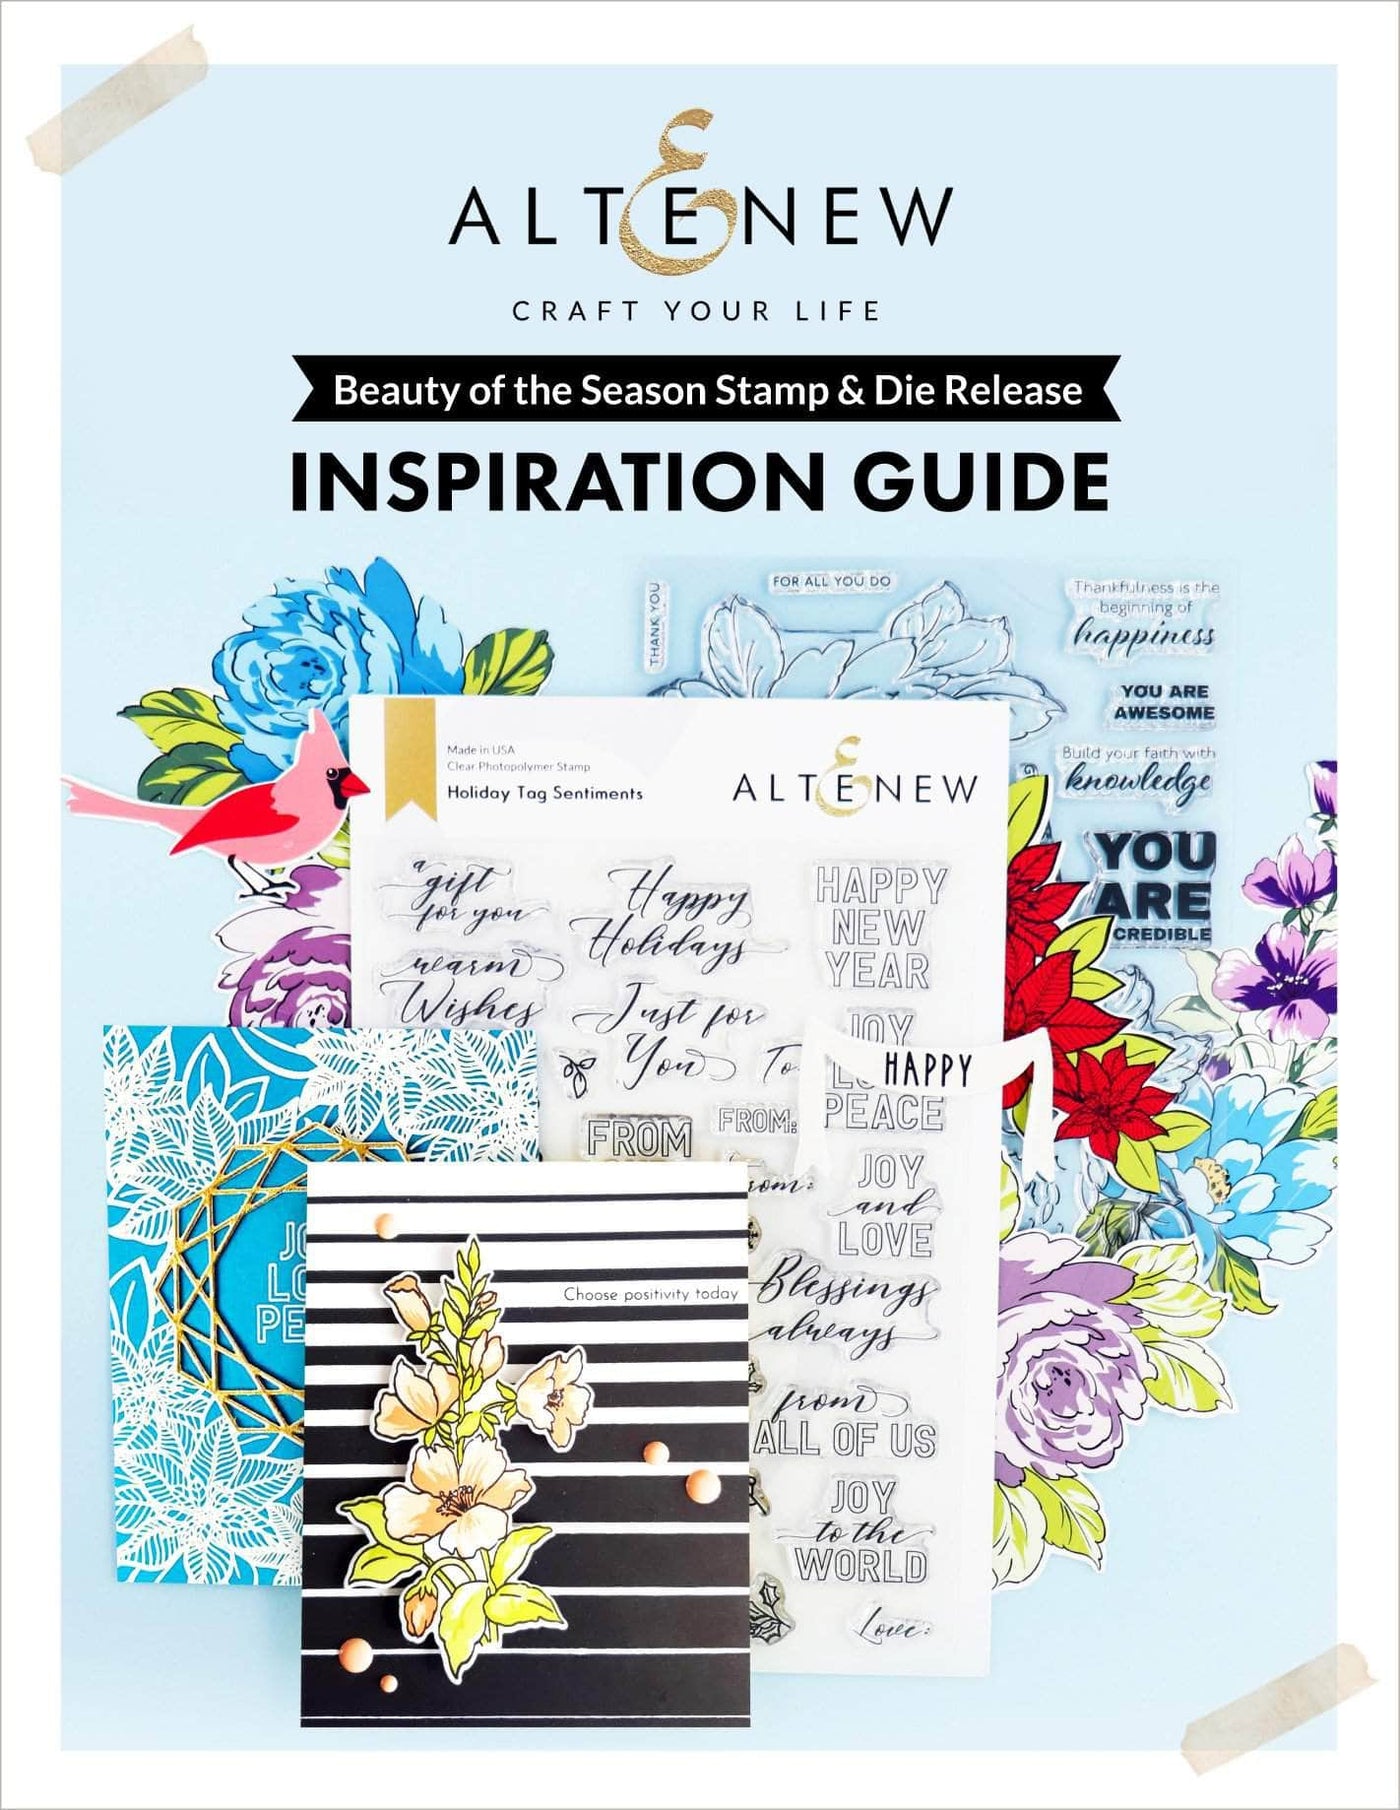 Printed Media Beauty of the Season Stamp & Die Release Inspiration Guide